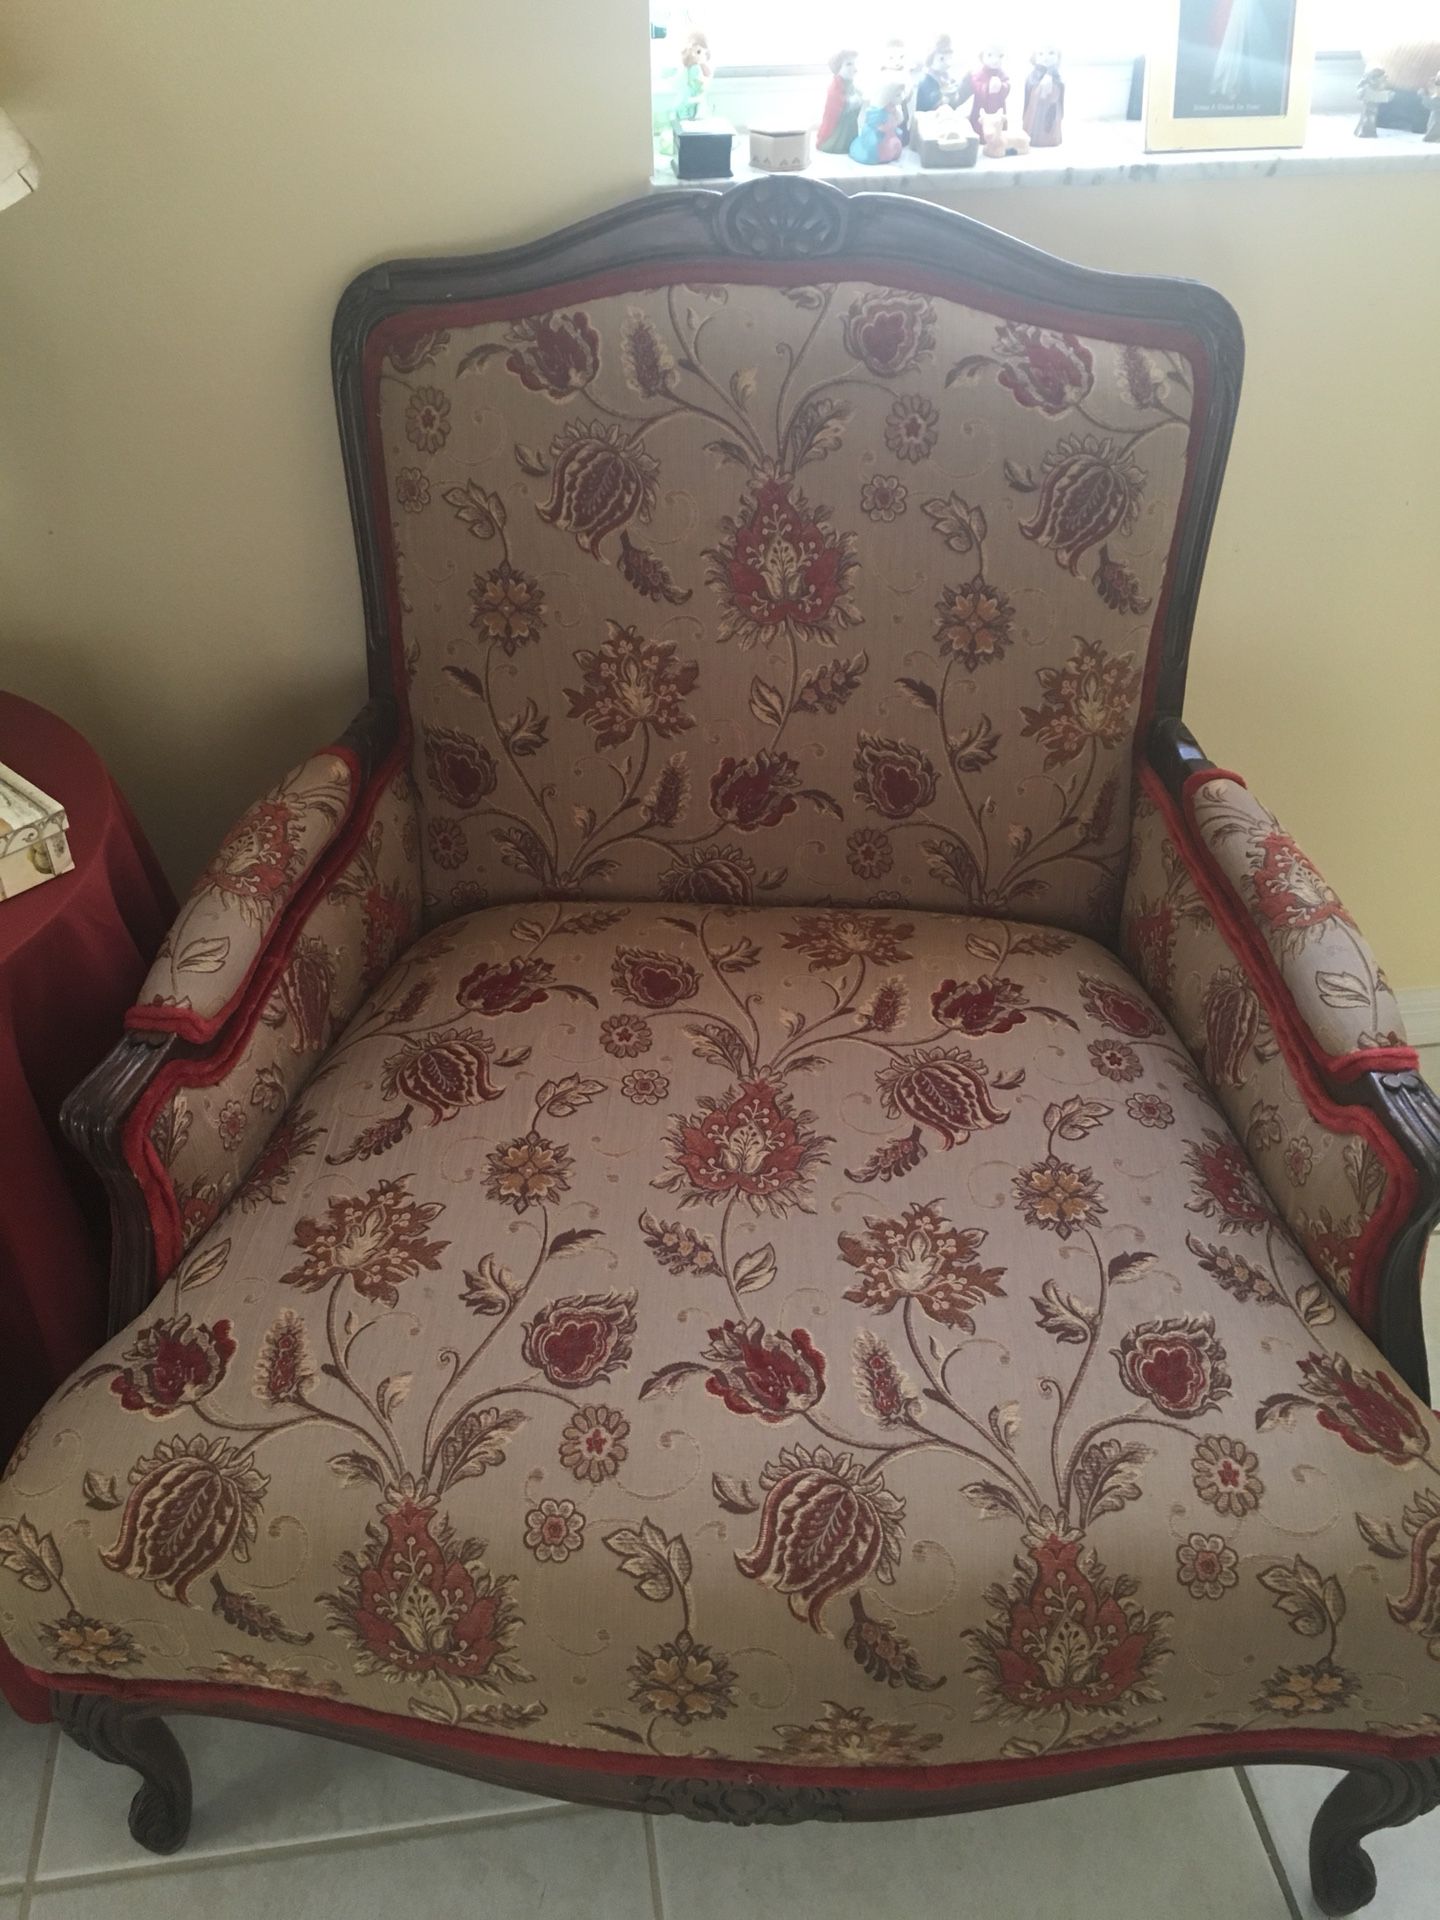 2 Antique chairs